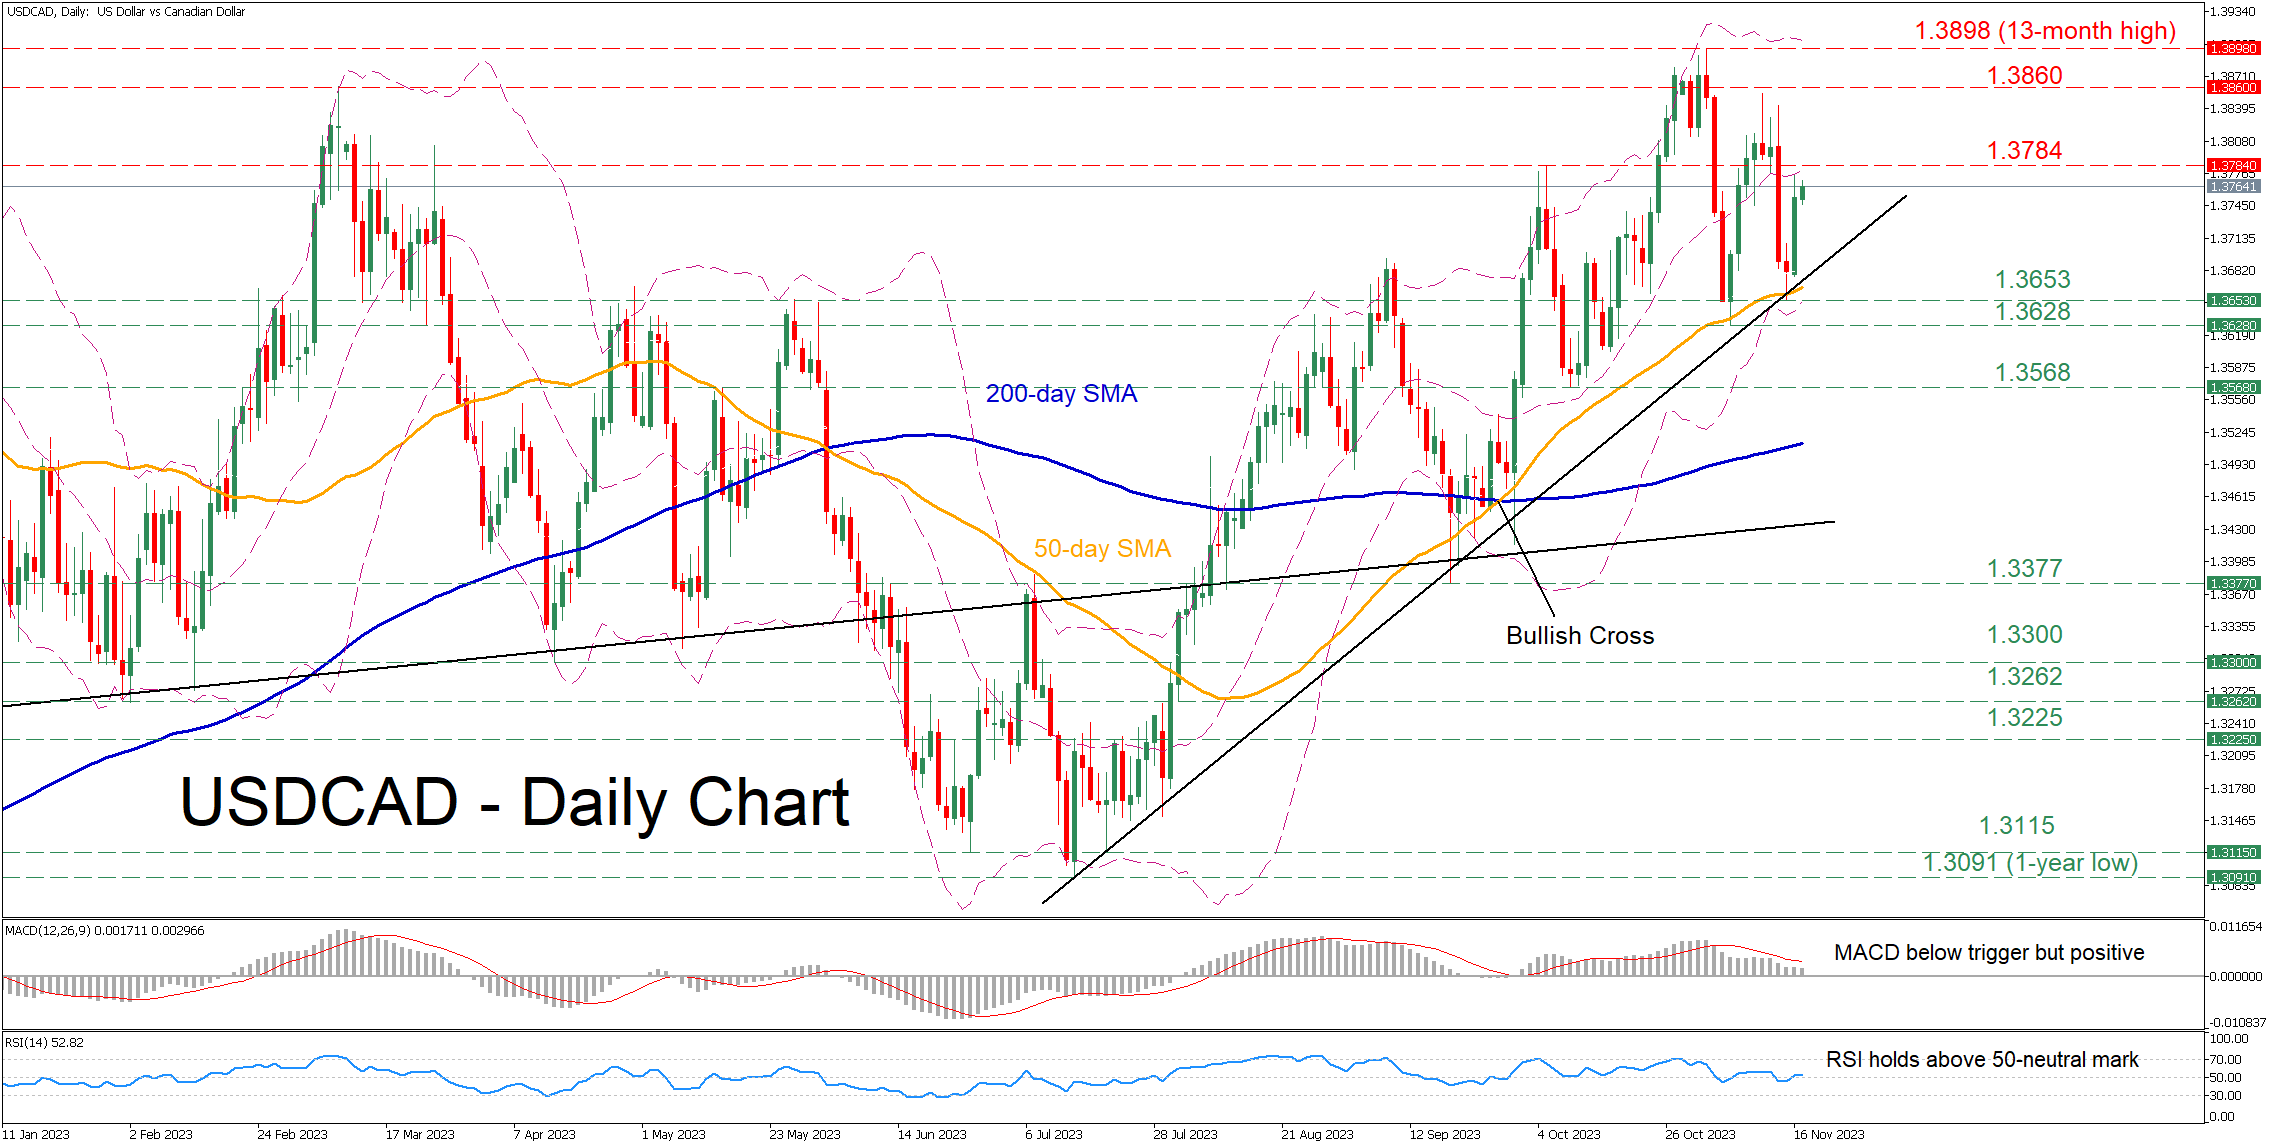 USDCAD's Resilience: Bouncing Back from Lows and Eyeing New Highs